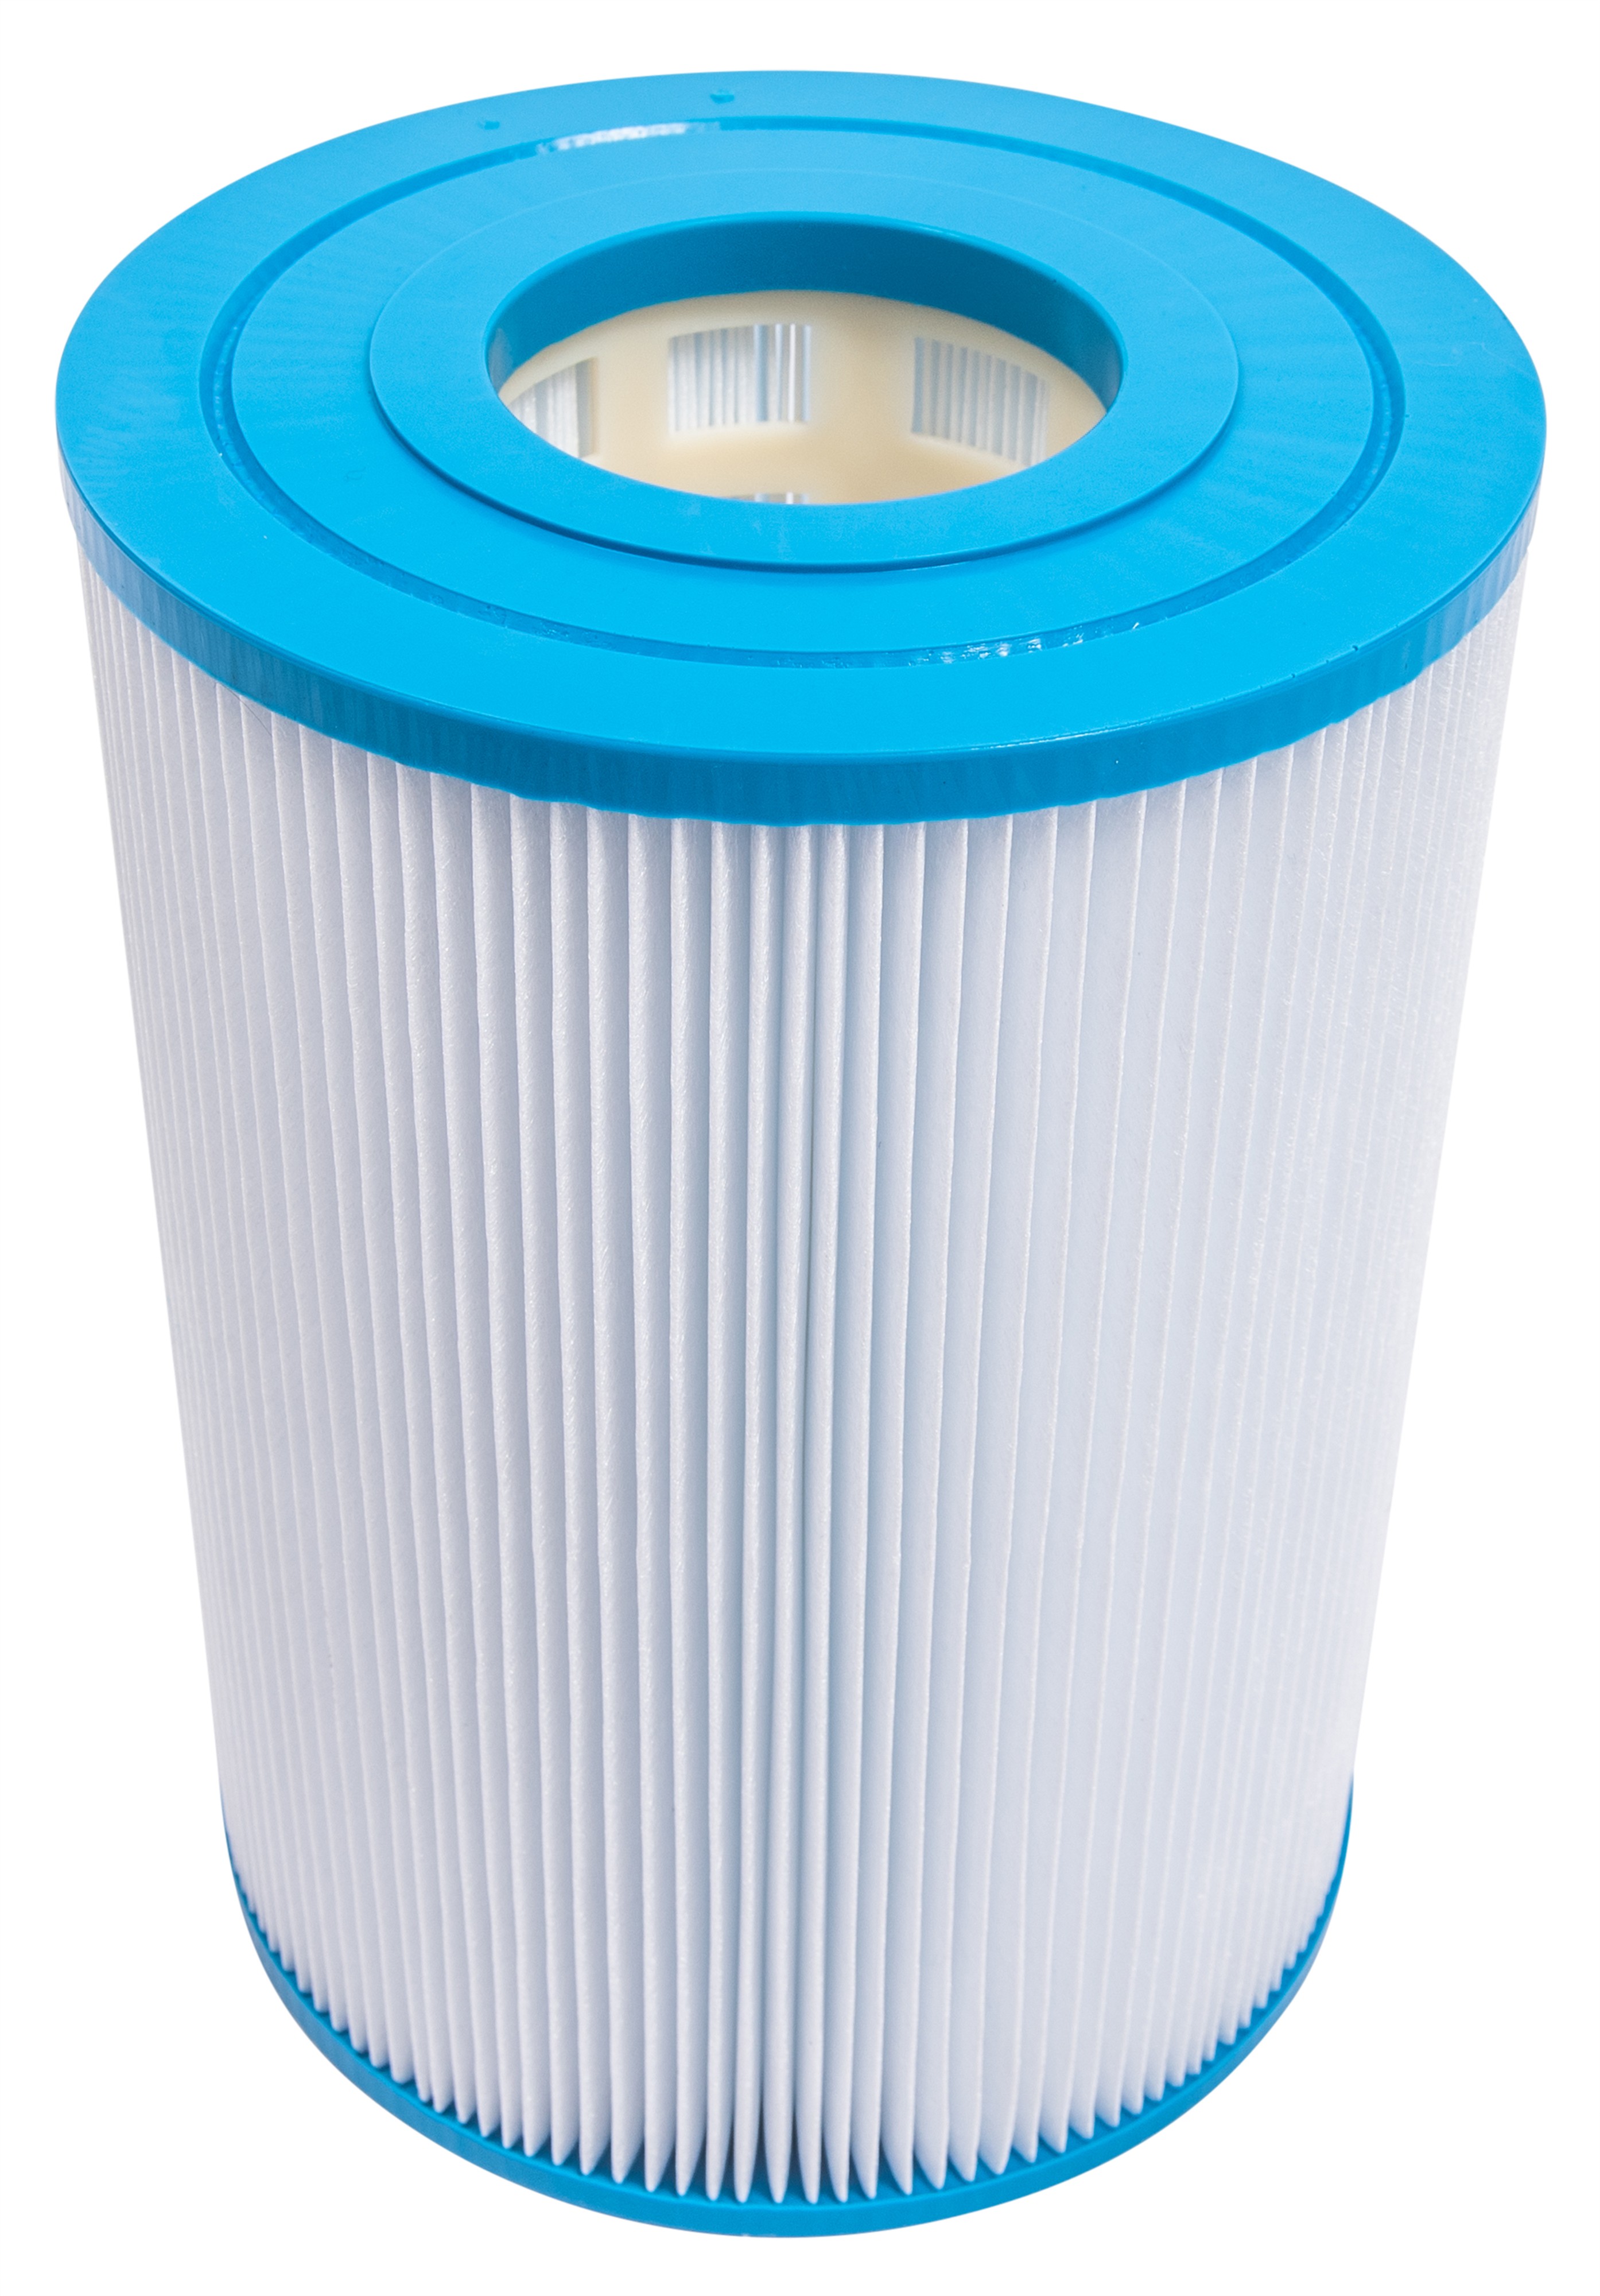 Replacement cartridge for 30SF Pool Filter